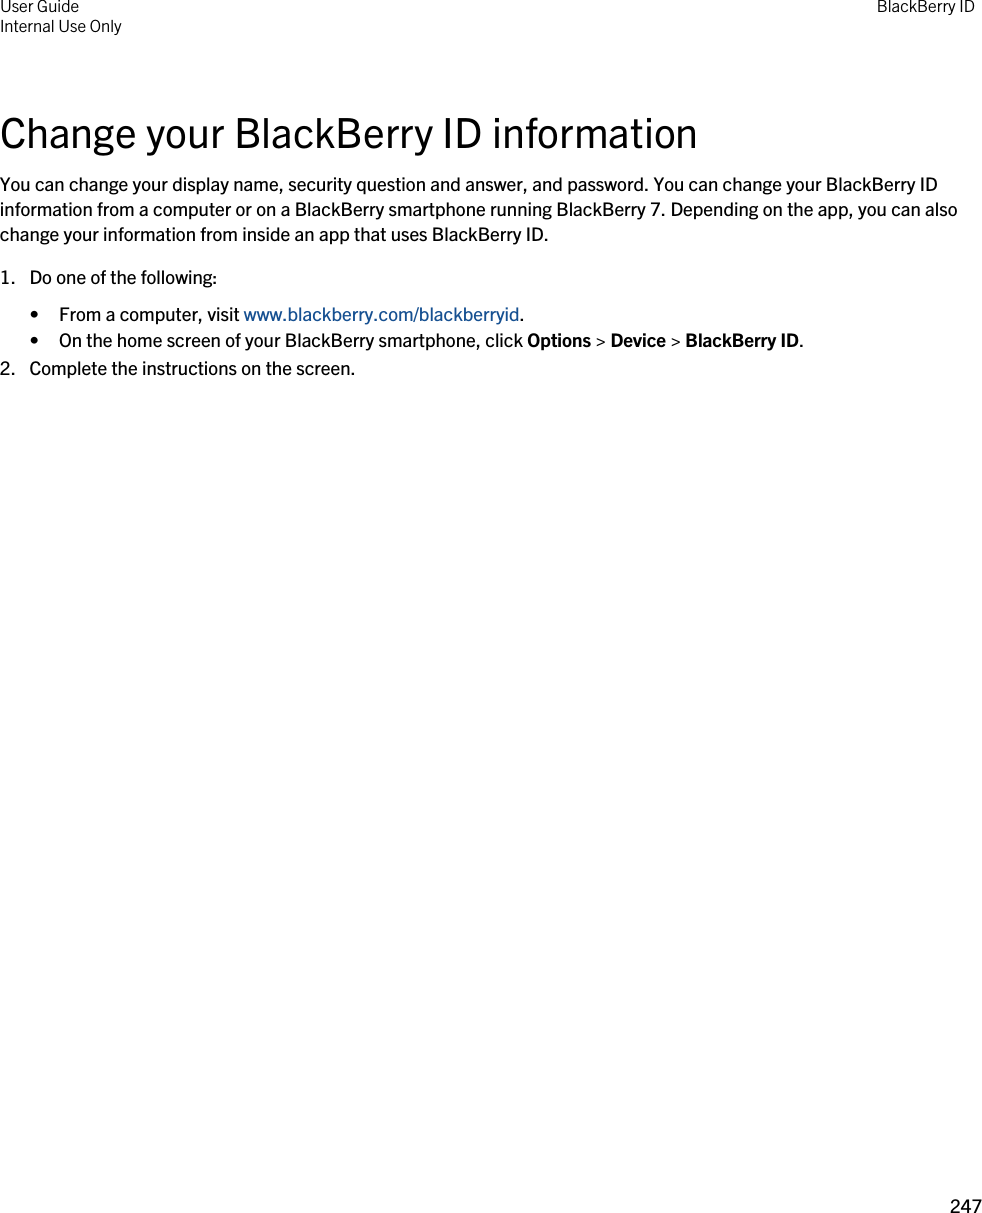 Change your BlackBerry ID informationYou can change your display name, security question and answer, and password. You can change your BlackBerry ID information from a computer or on a BlackBerry smartphone running BlackBerry 7. Depending on the app, you can also change your information from inside an app that uses BlackBerry ID.1. Do one of the following:• From a computer, visit www.blackberry.com/blackberryid.• On the home screen of your BlackBerry smartphone, click Options &gt; Device &gt; BlackBerry ID.2. Complete the instructions on the screen.User GuideInternal Use Only BlackBerry ID247 